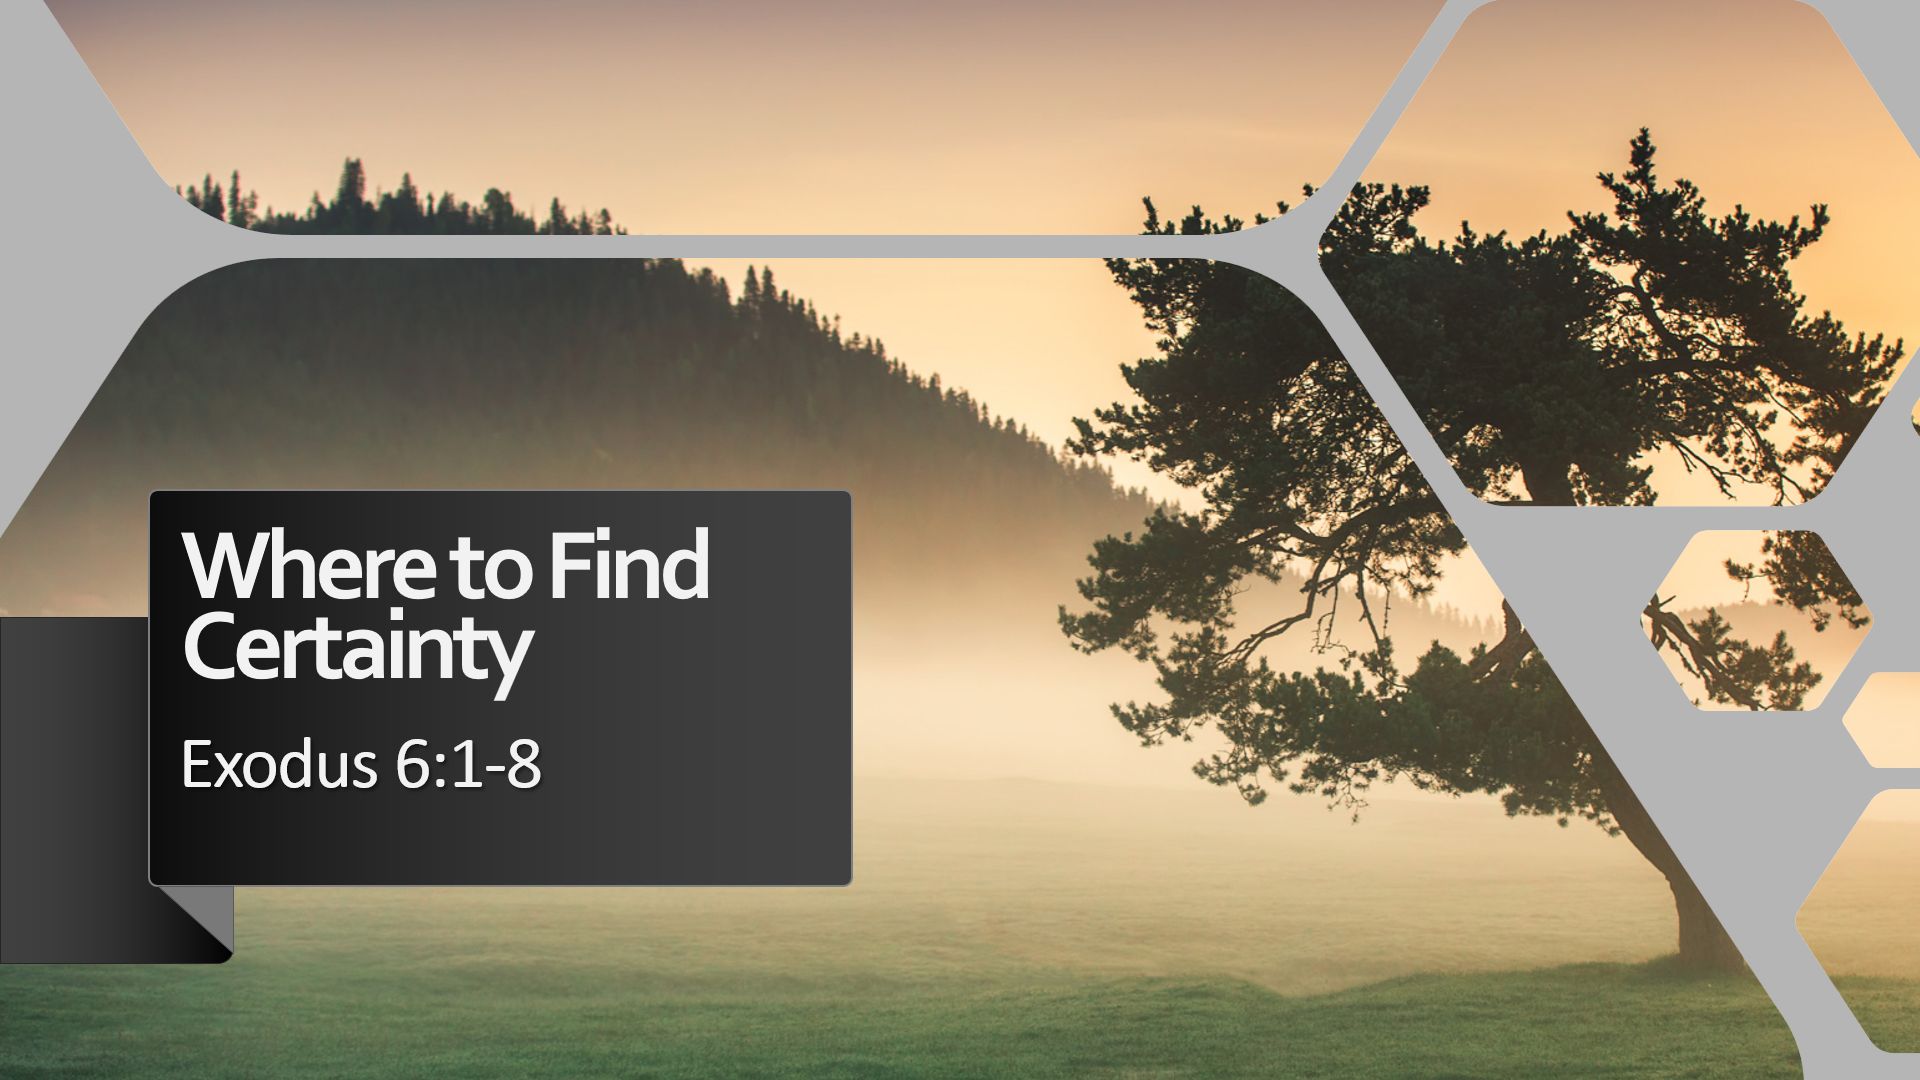 Where to Find Certainty